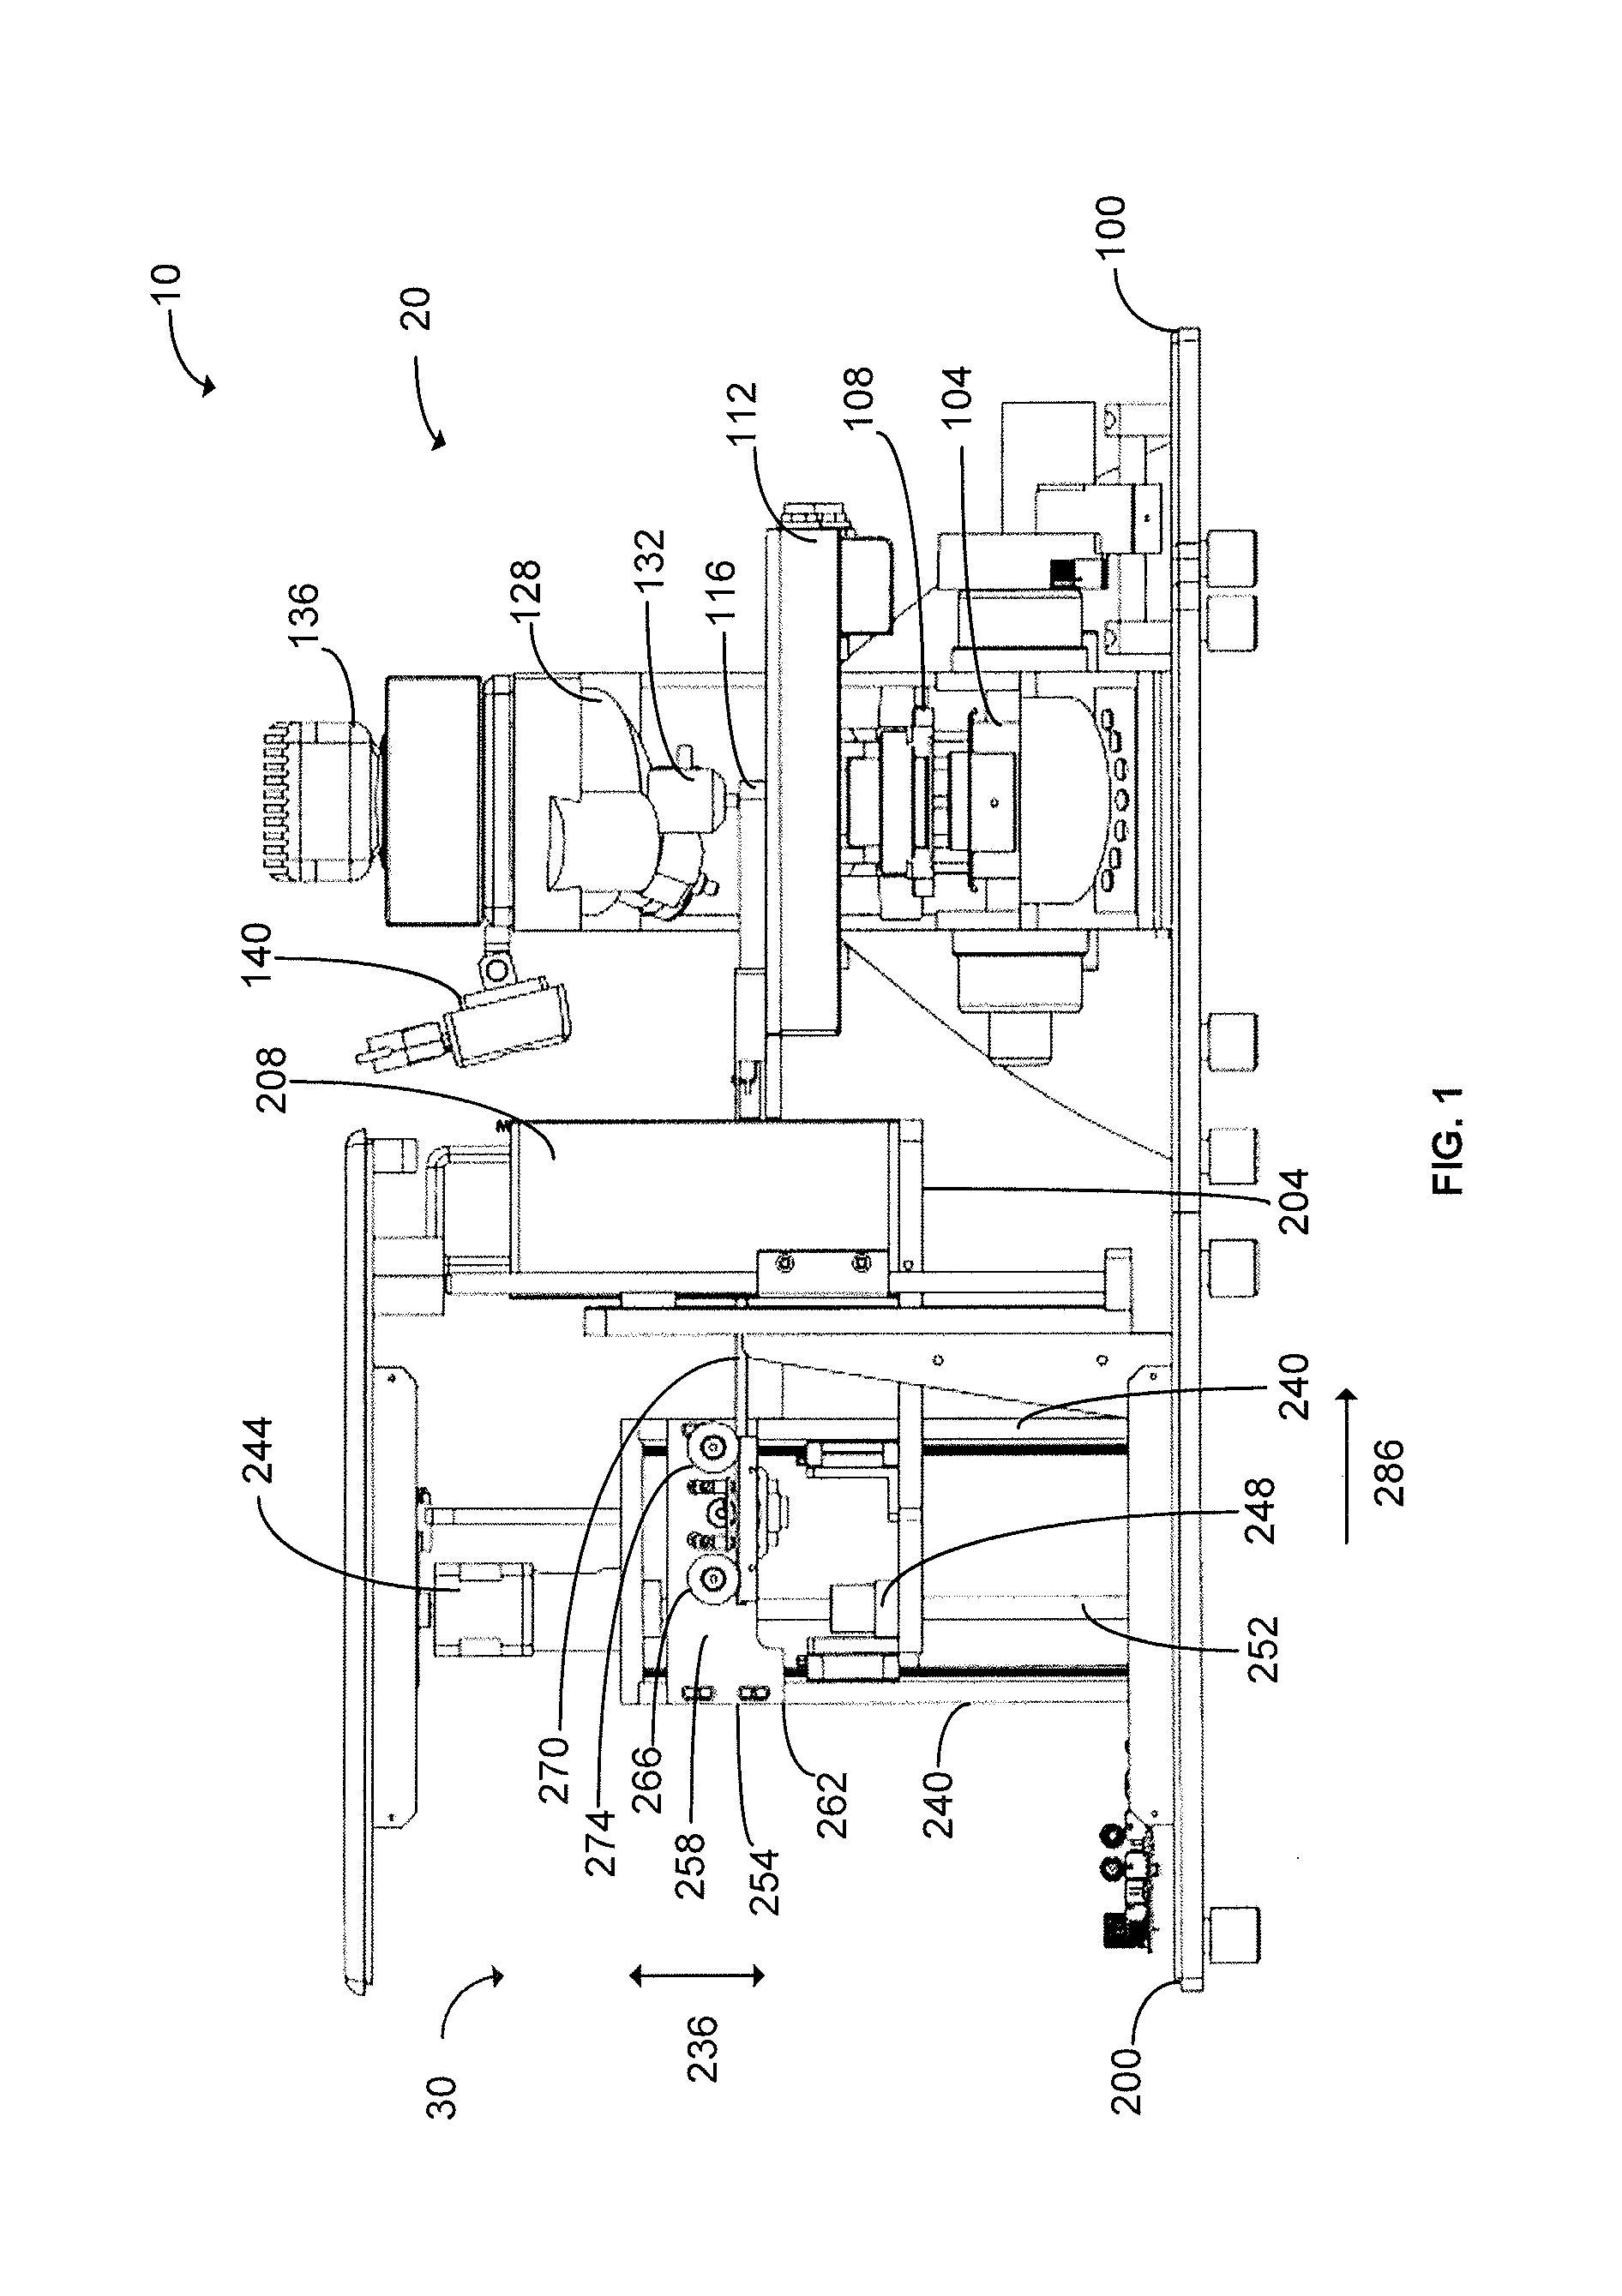 Automatic slide loading system and method